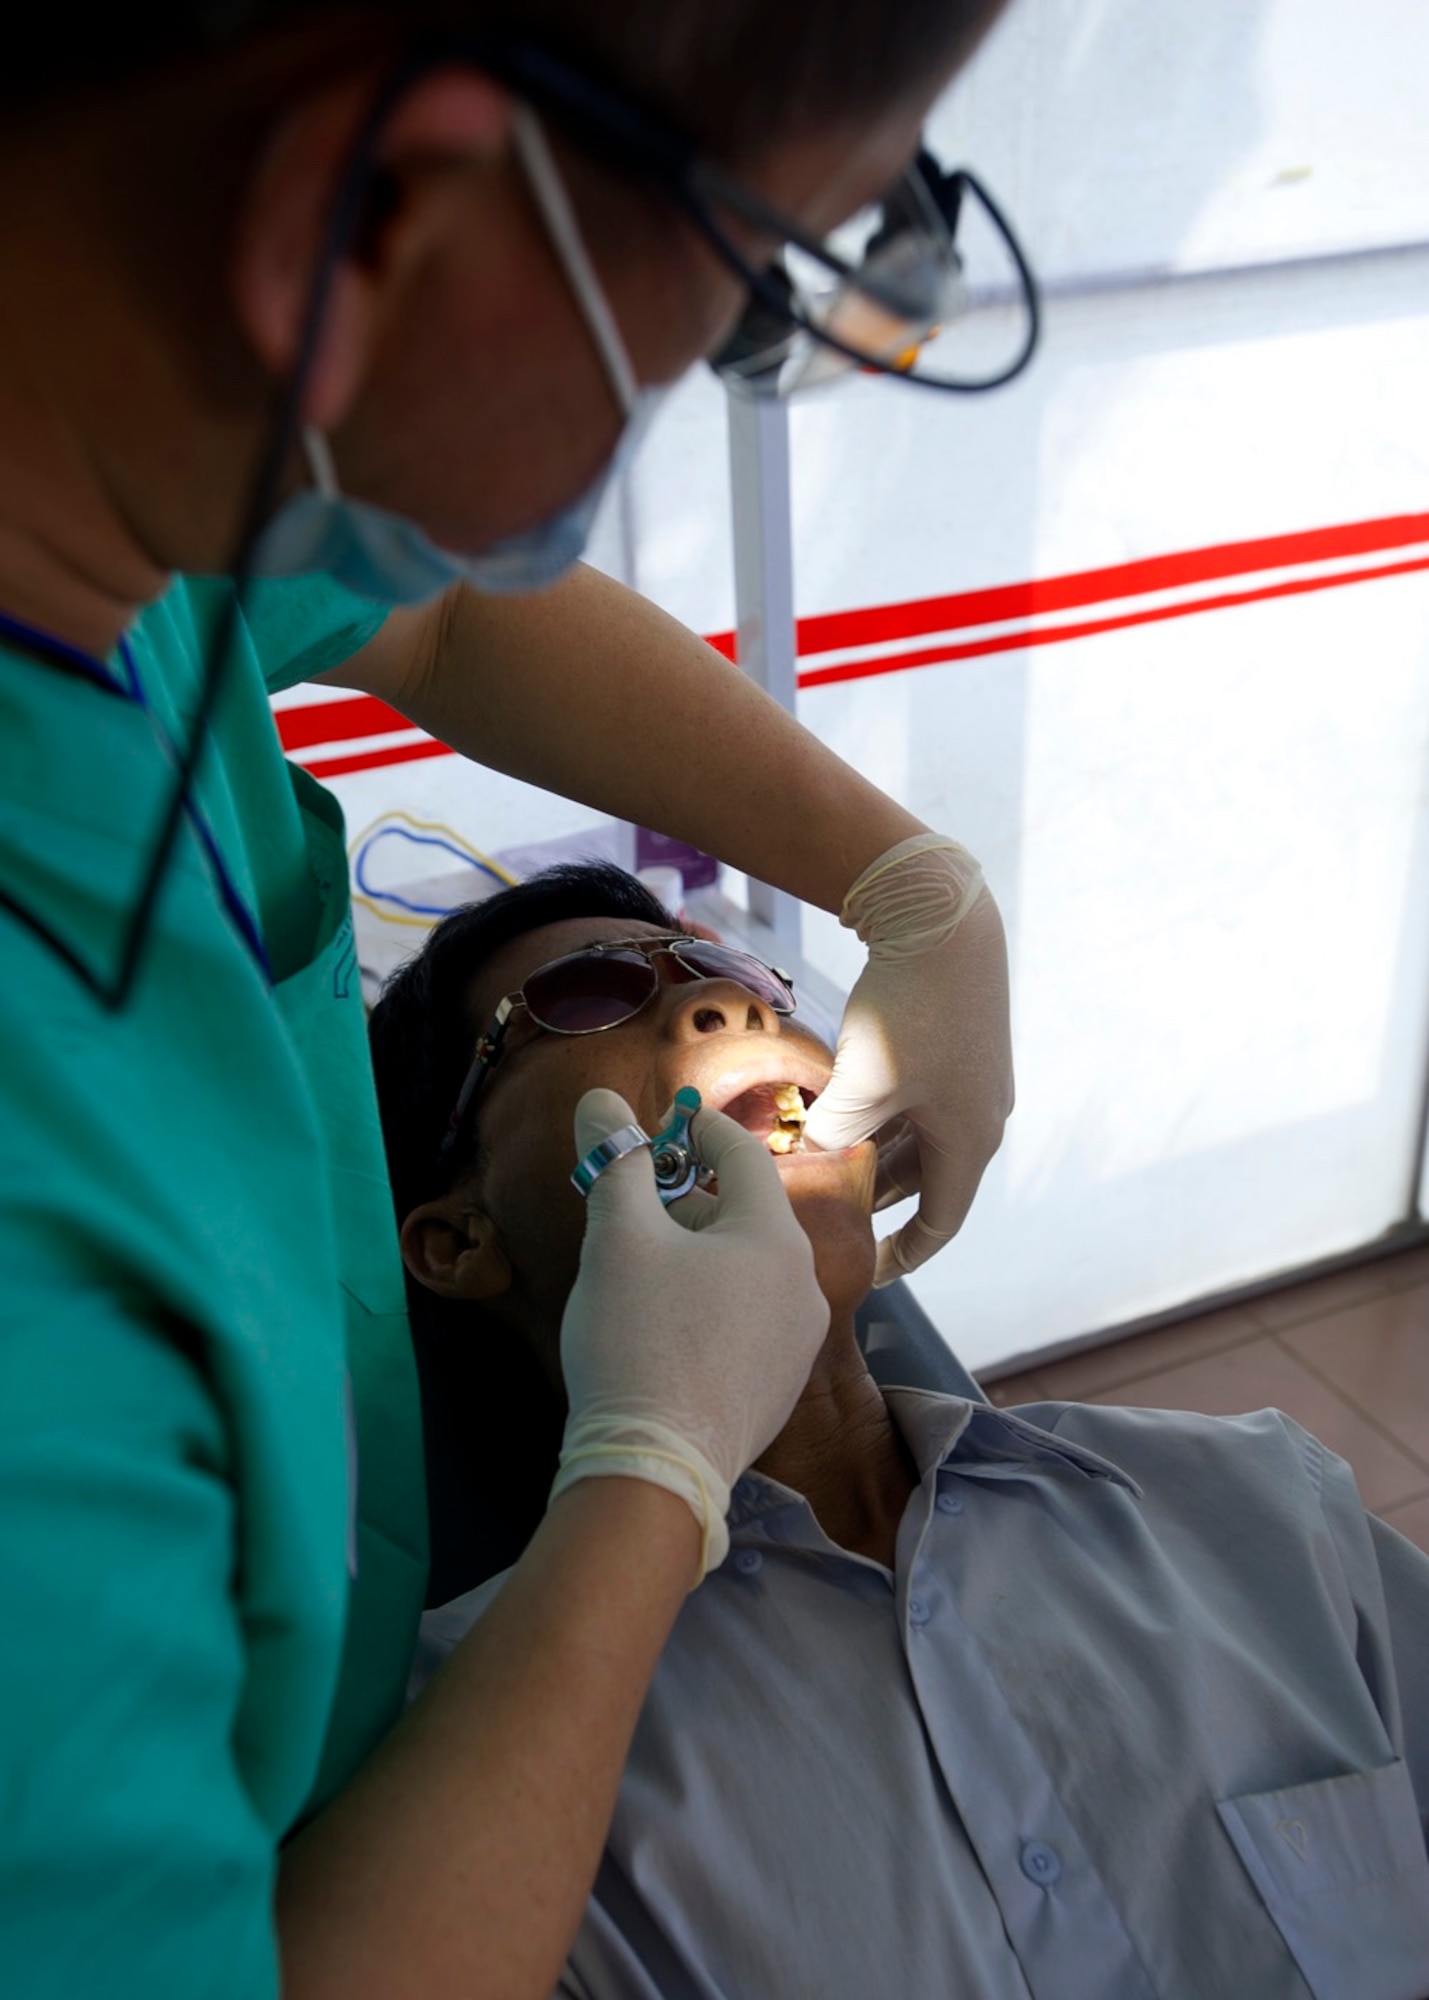 U.S. Navy Lt. Hai Doan, 1st Dental Battalion general dentist, Camp Pendleton, Calif., gives anesthesia to a patient prior to an extraction during a Operation Pacific Angel 15-3 health service outreach event at Dung Quat Culture - Sports Center, Quang Ngai Province, Vietnam March 23, 2015. The annual regional humanitarian assistance and disaster relief operation provided general health, dental, optometry, pediatrics, and engineering programs to the local people, which helped to foster host nation and multilateral partnership. (U.S. Air Force photo by Staff Sgt. Tong Duong/ Released)